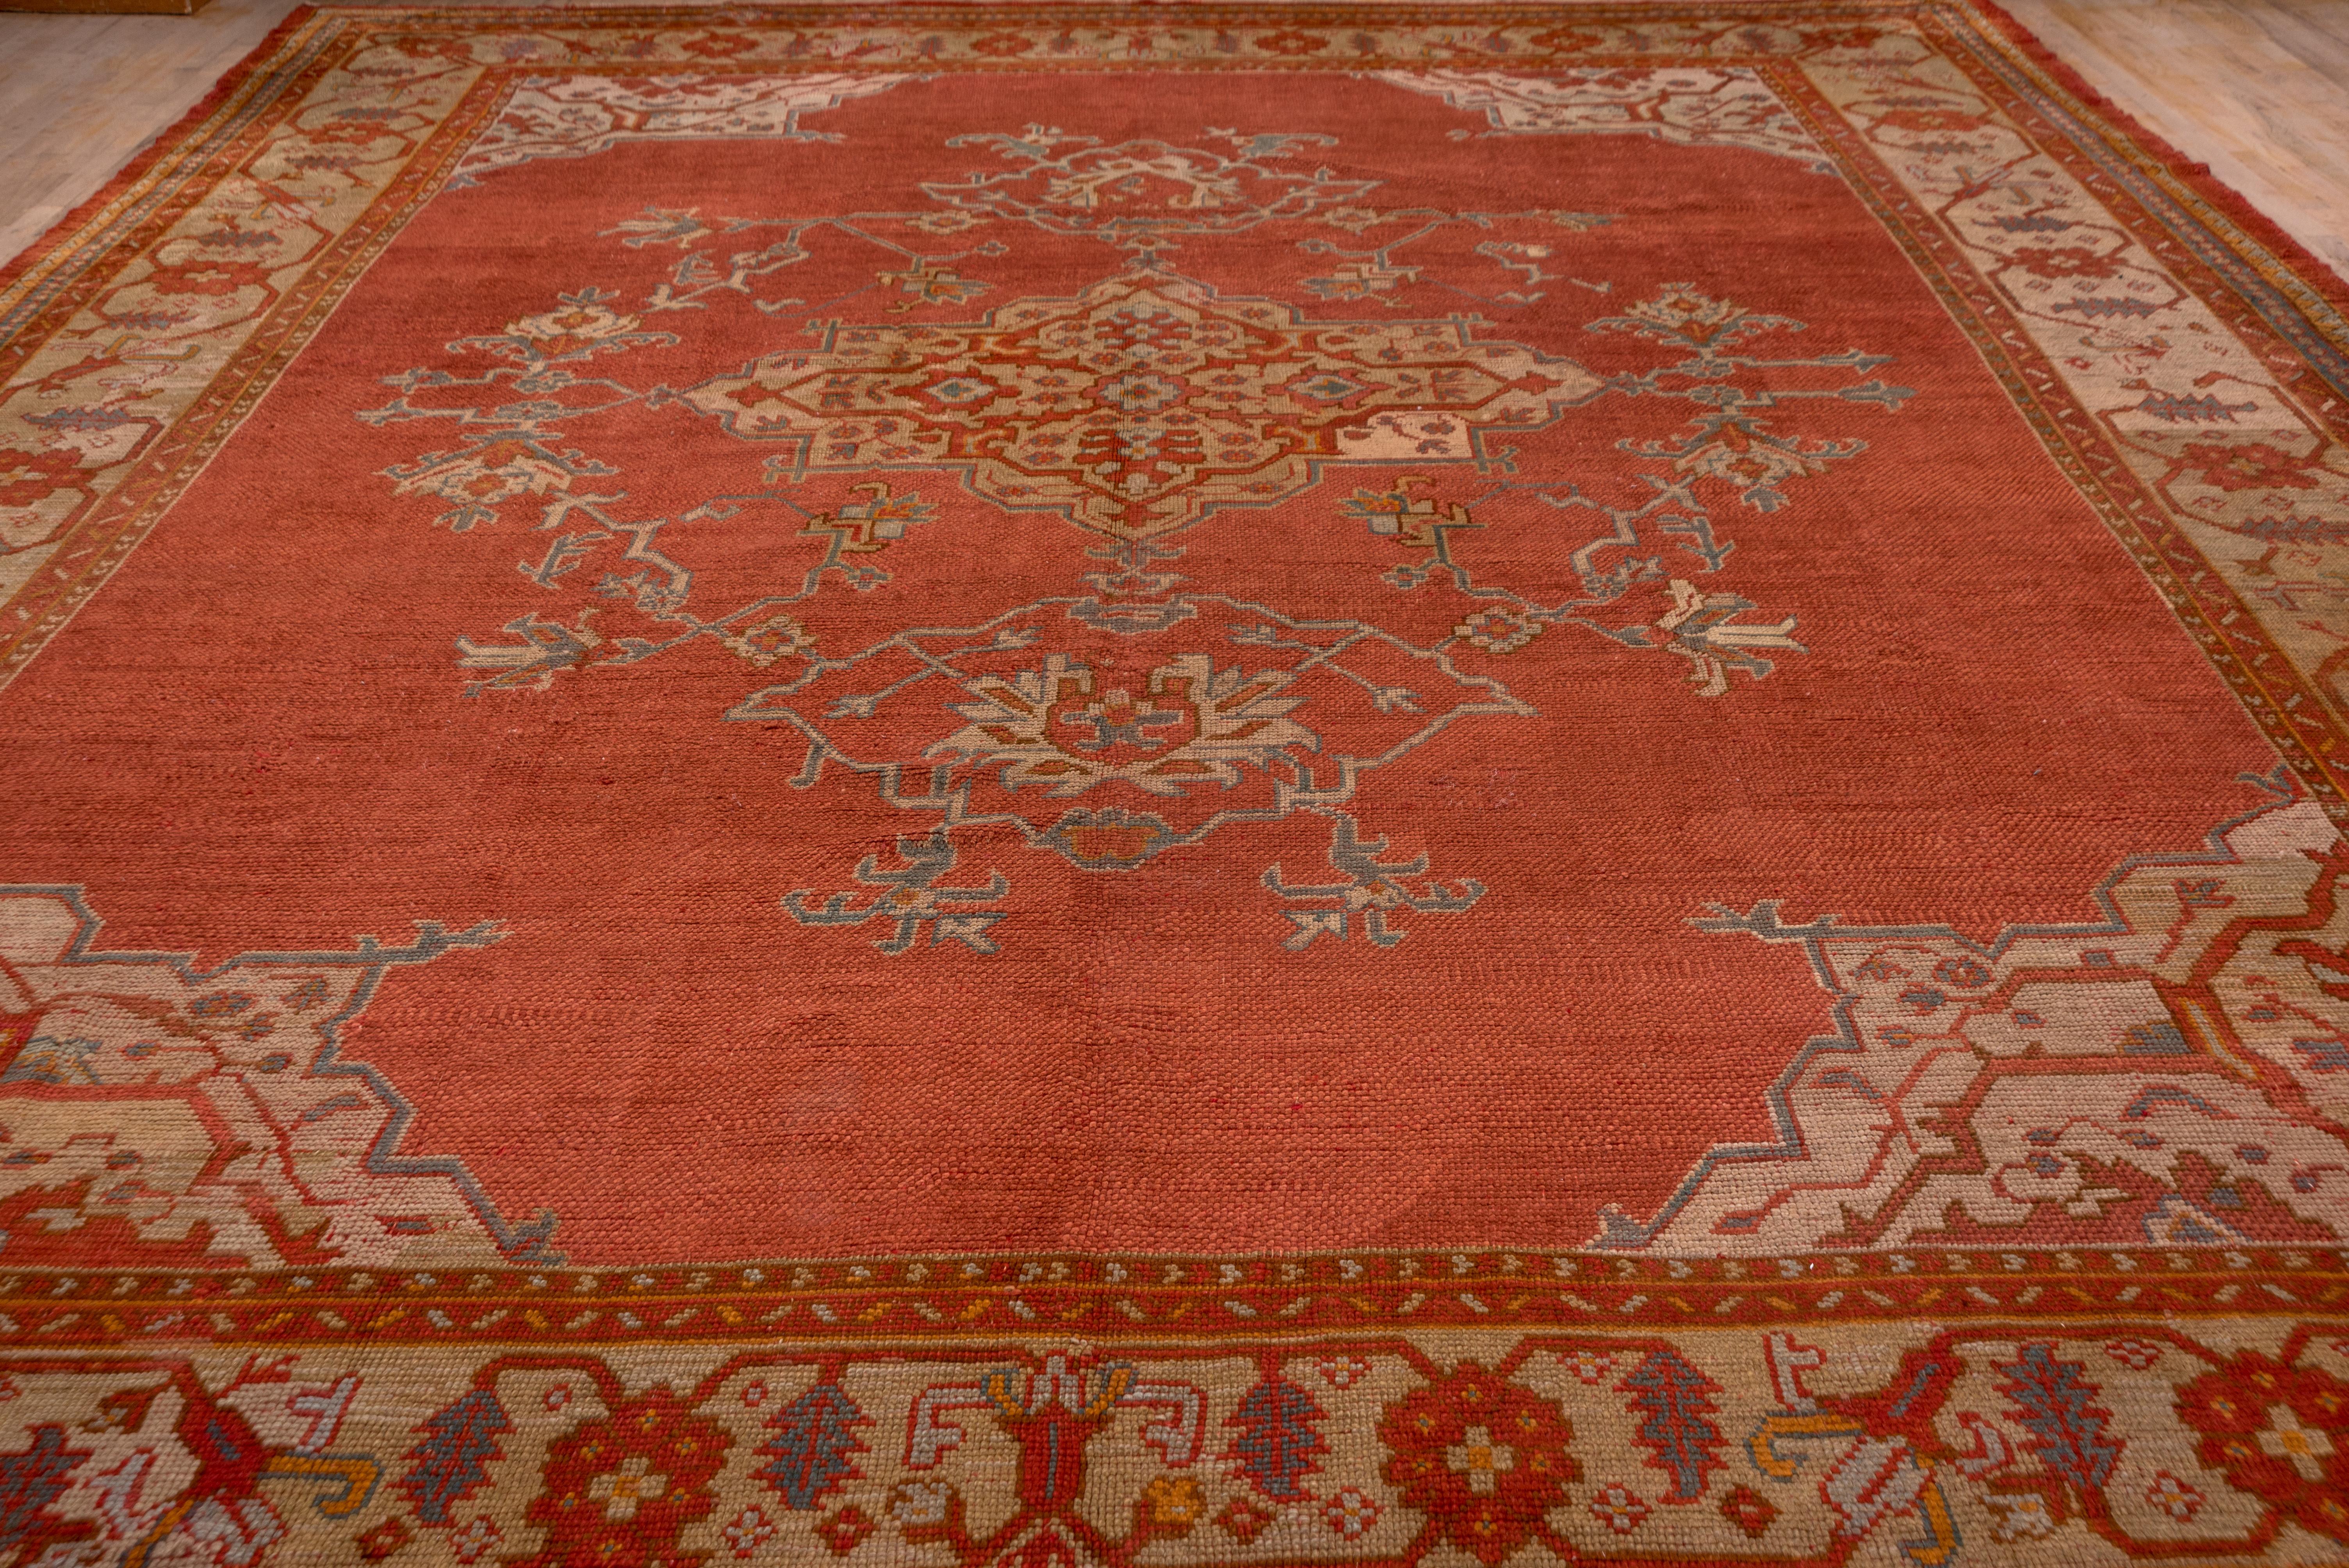 The Turkey red field displays an arabesque filled octogramme medallion with enormous pendants enclosing Classic palmettes with corner pieces en suite to the medallion. The green border,medallion and corners are all in the same chromatic key..